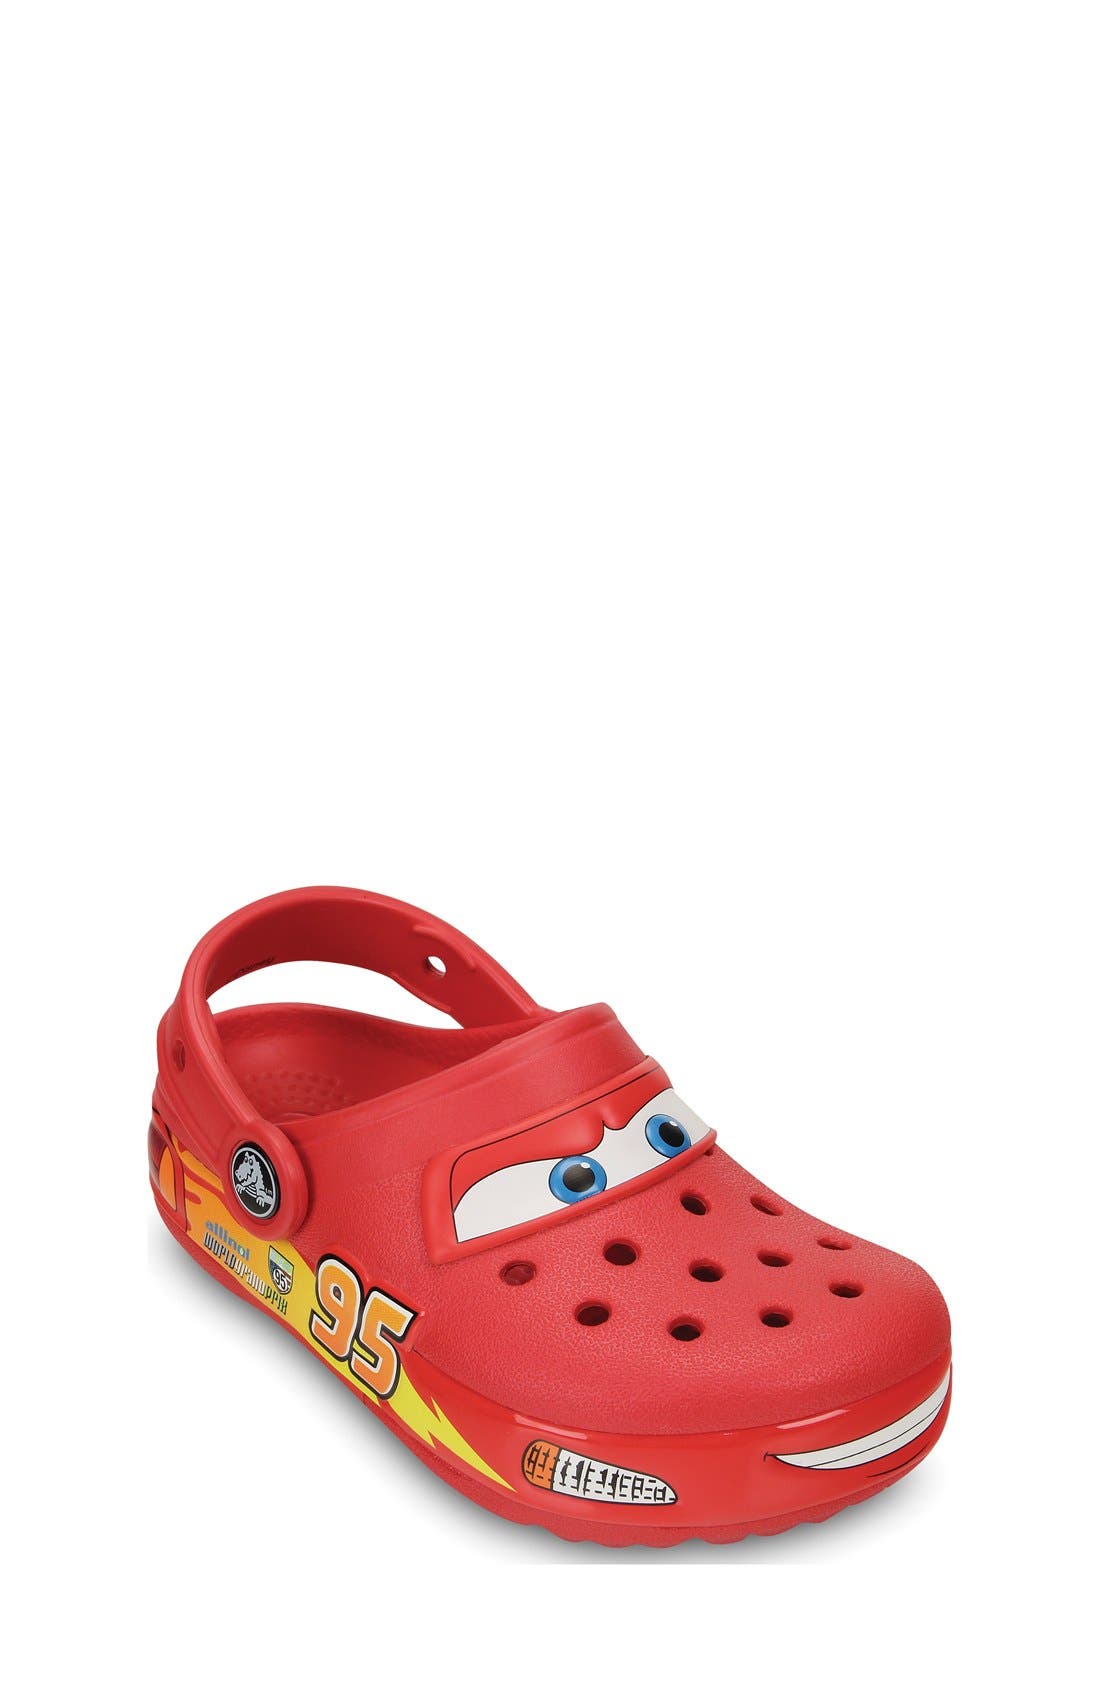 cars crocs for toddlers